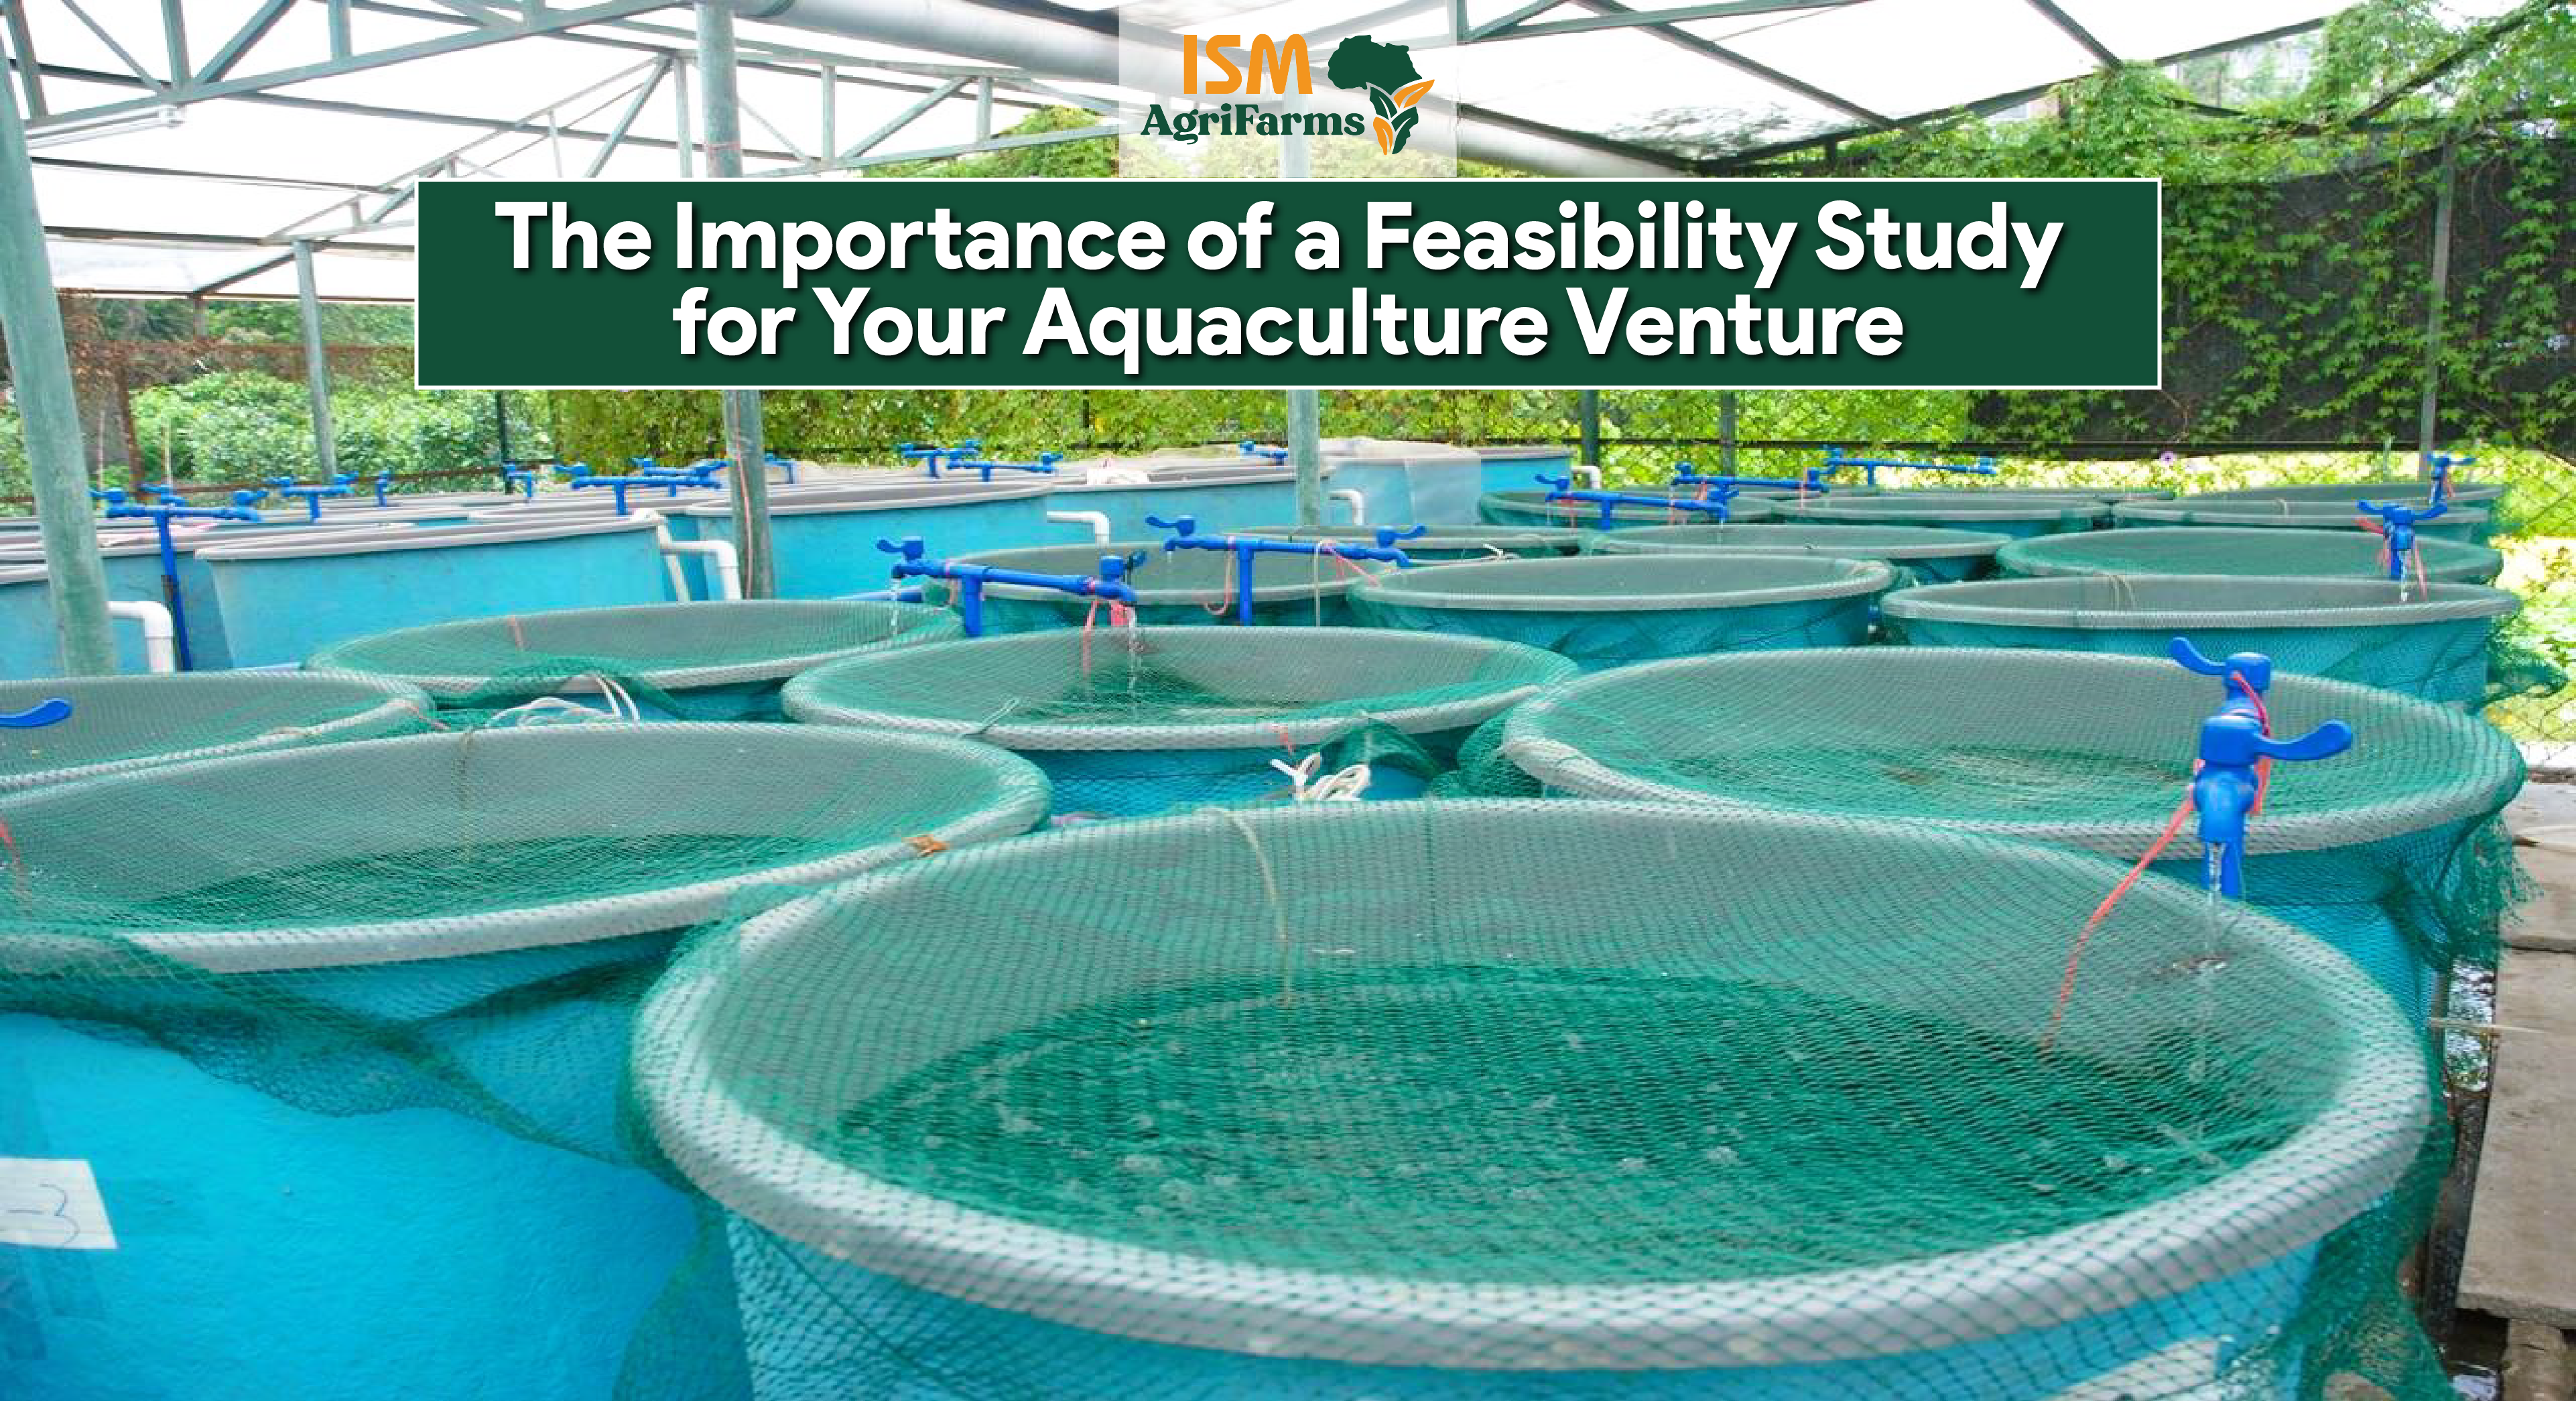 The Importance of a Feasibility Study for Your Aquaculture Venture